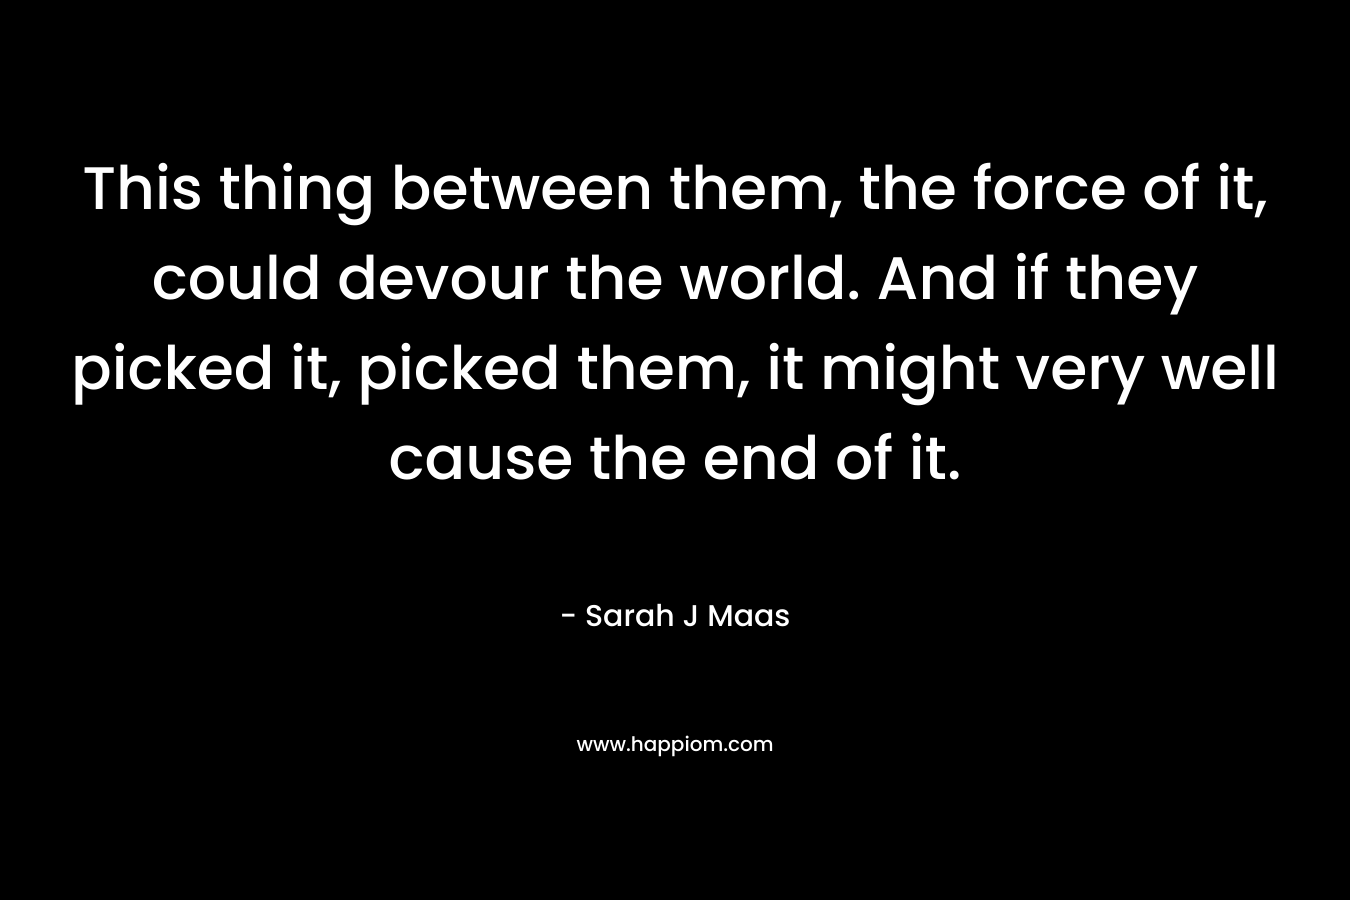 This thing between them, the force of it, could devour the world. And if they picked it, picked them, it might very well cause the end of it. – Sarah J Maas